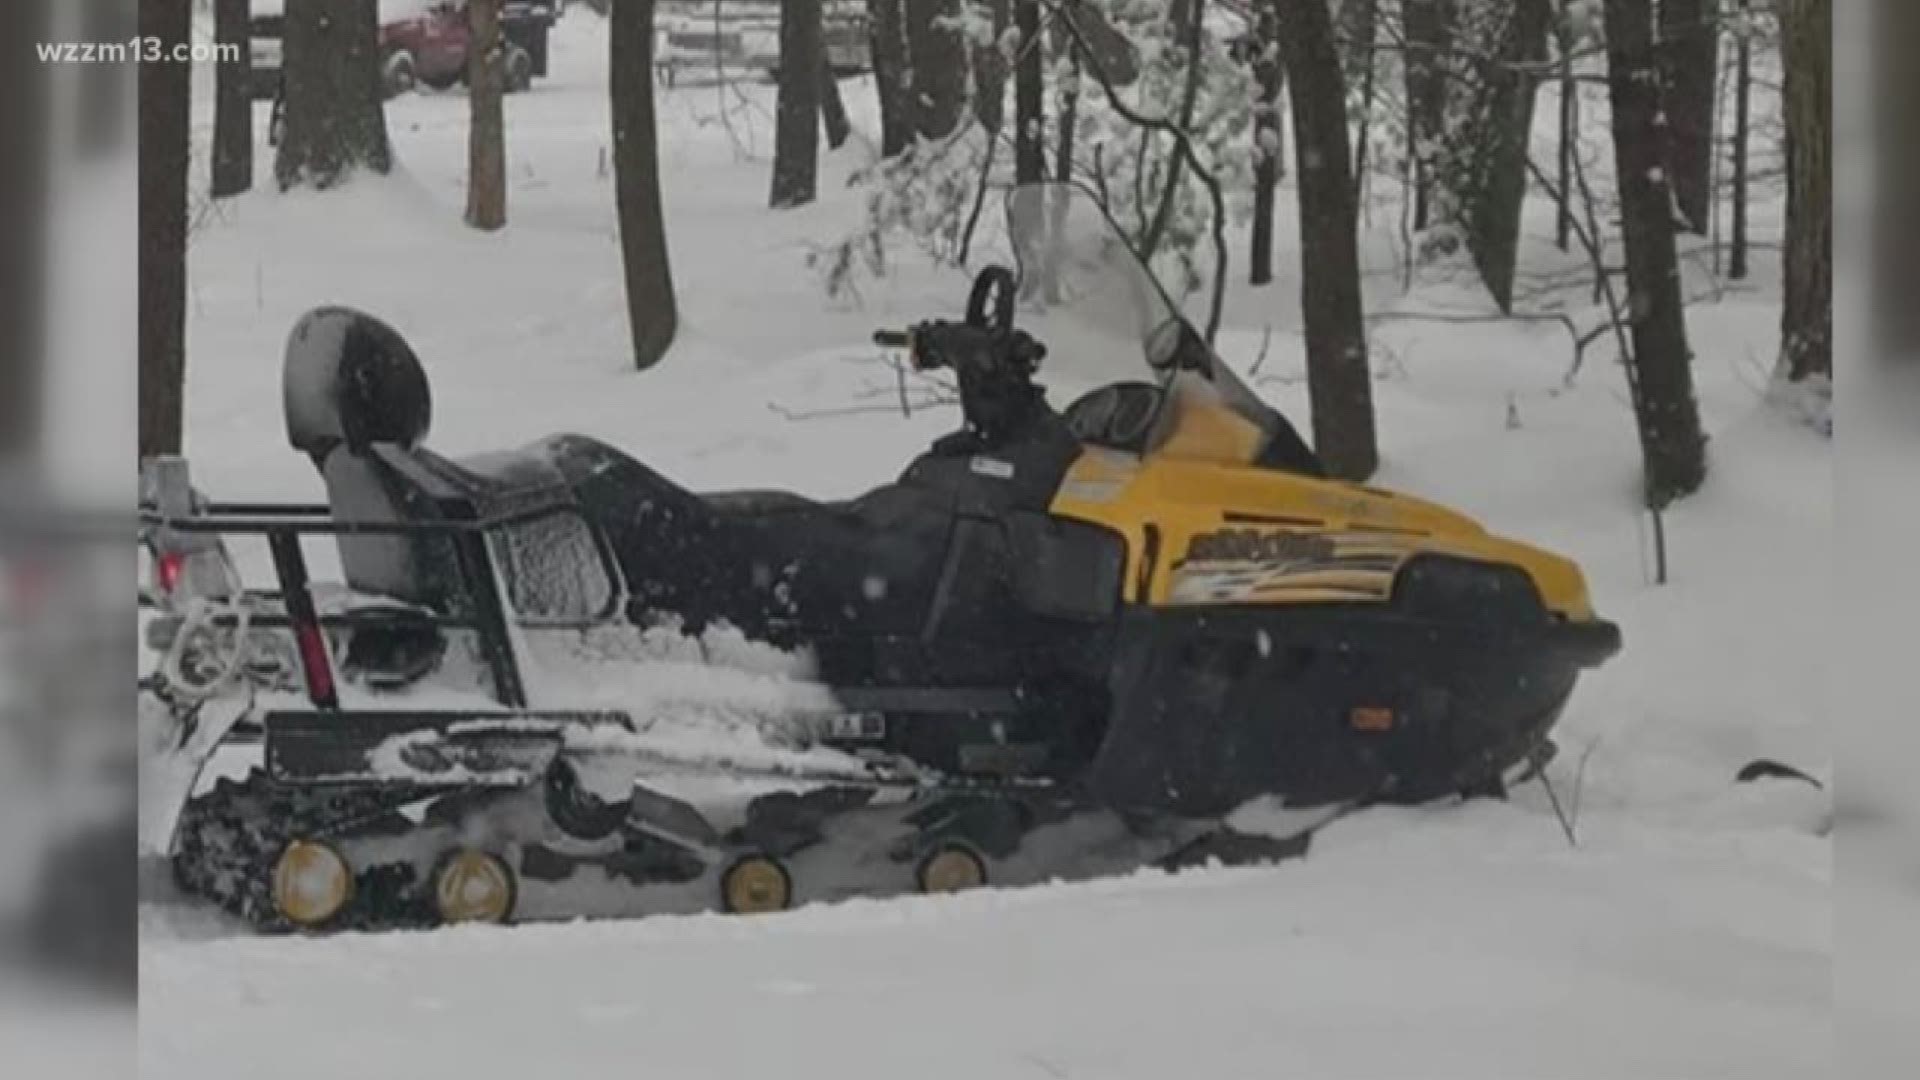 Search for stolen snowmobile in Muskegon